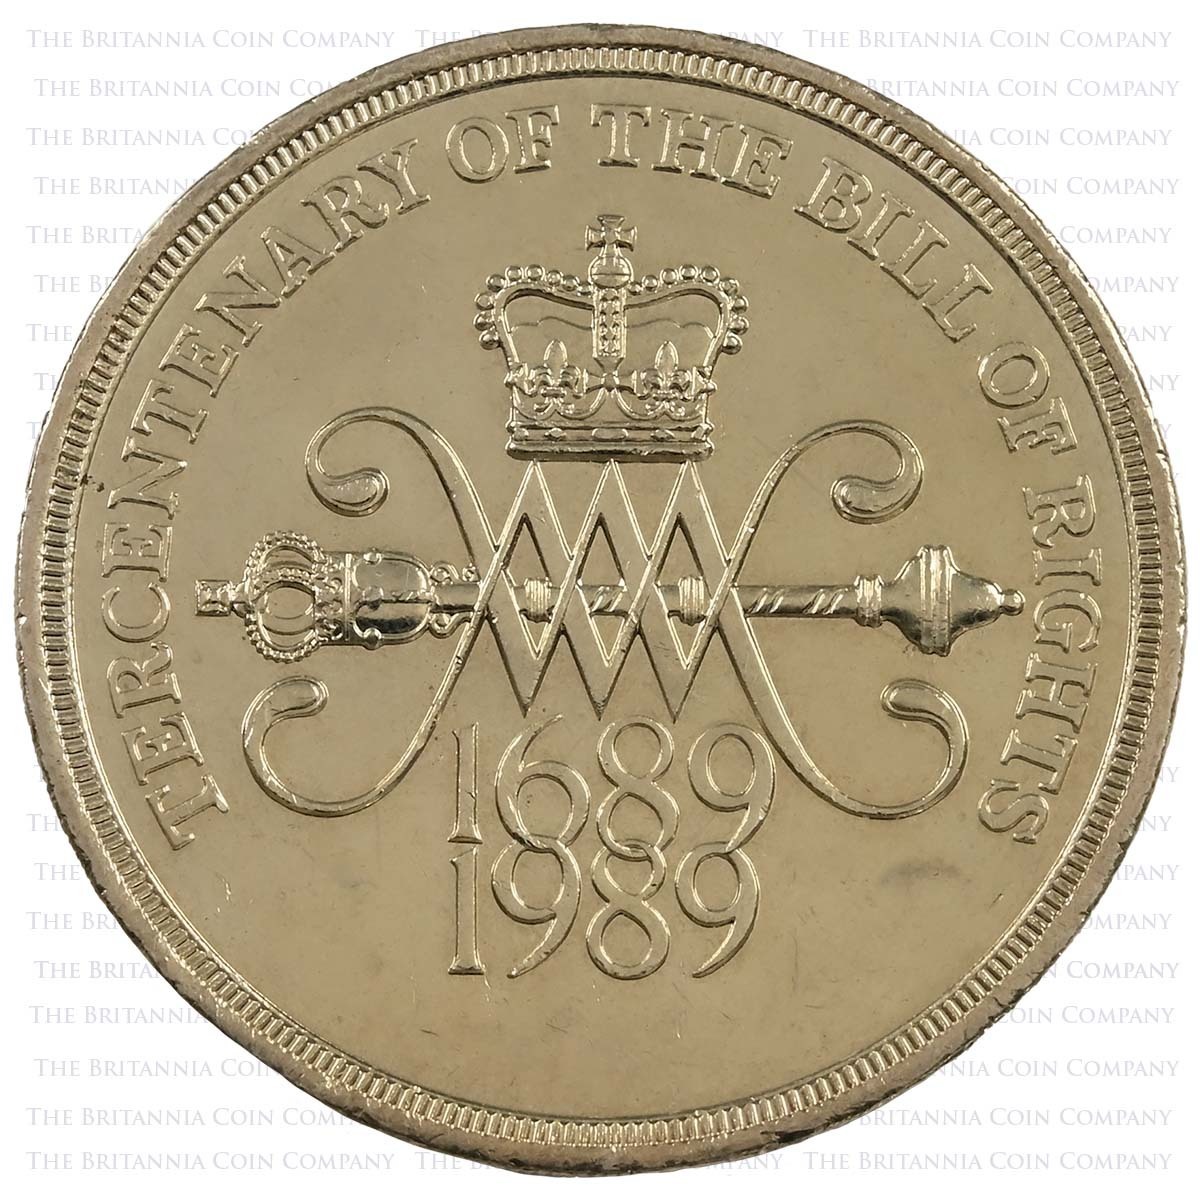 This 1989 coin celebrates 300 years since the Bill of Rights. This important piece of legislation set out the terms that the newly appointed King William III and Queen Mary II would rule, limiting their powers and establishing the rights of Parliament. Jo